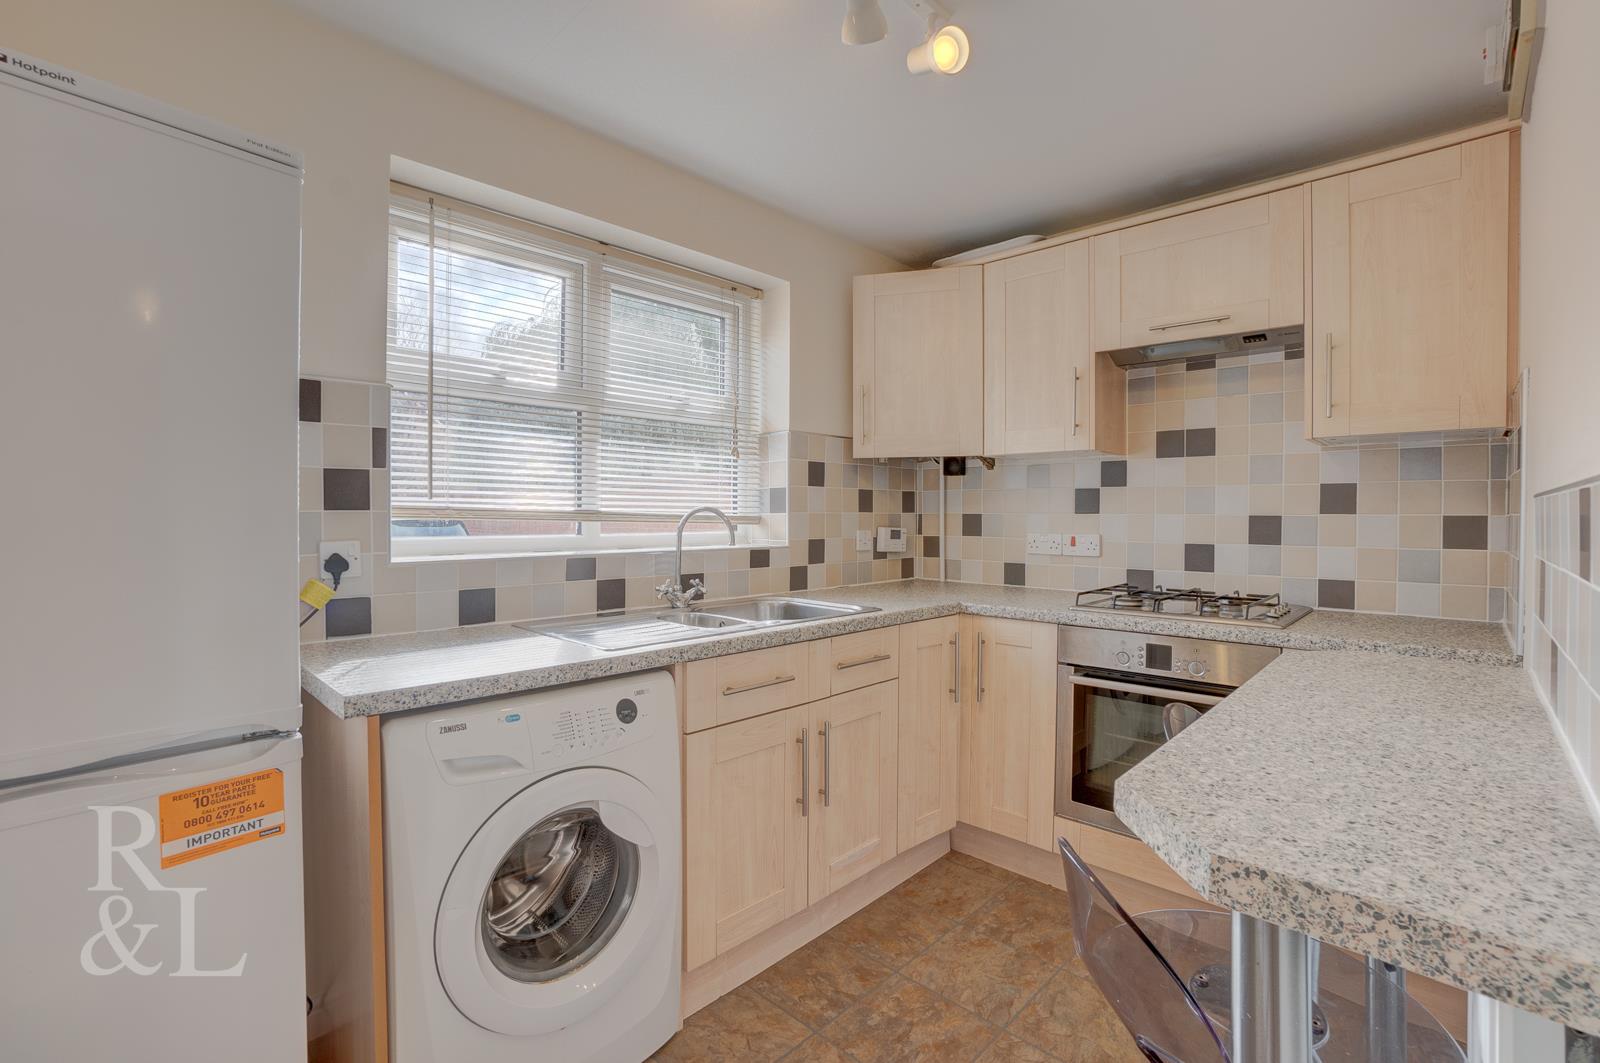 Property image for Oxendale Close, West Bridgford, Nottingham